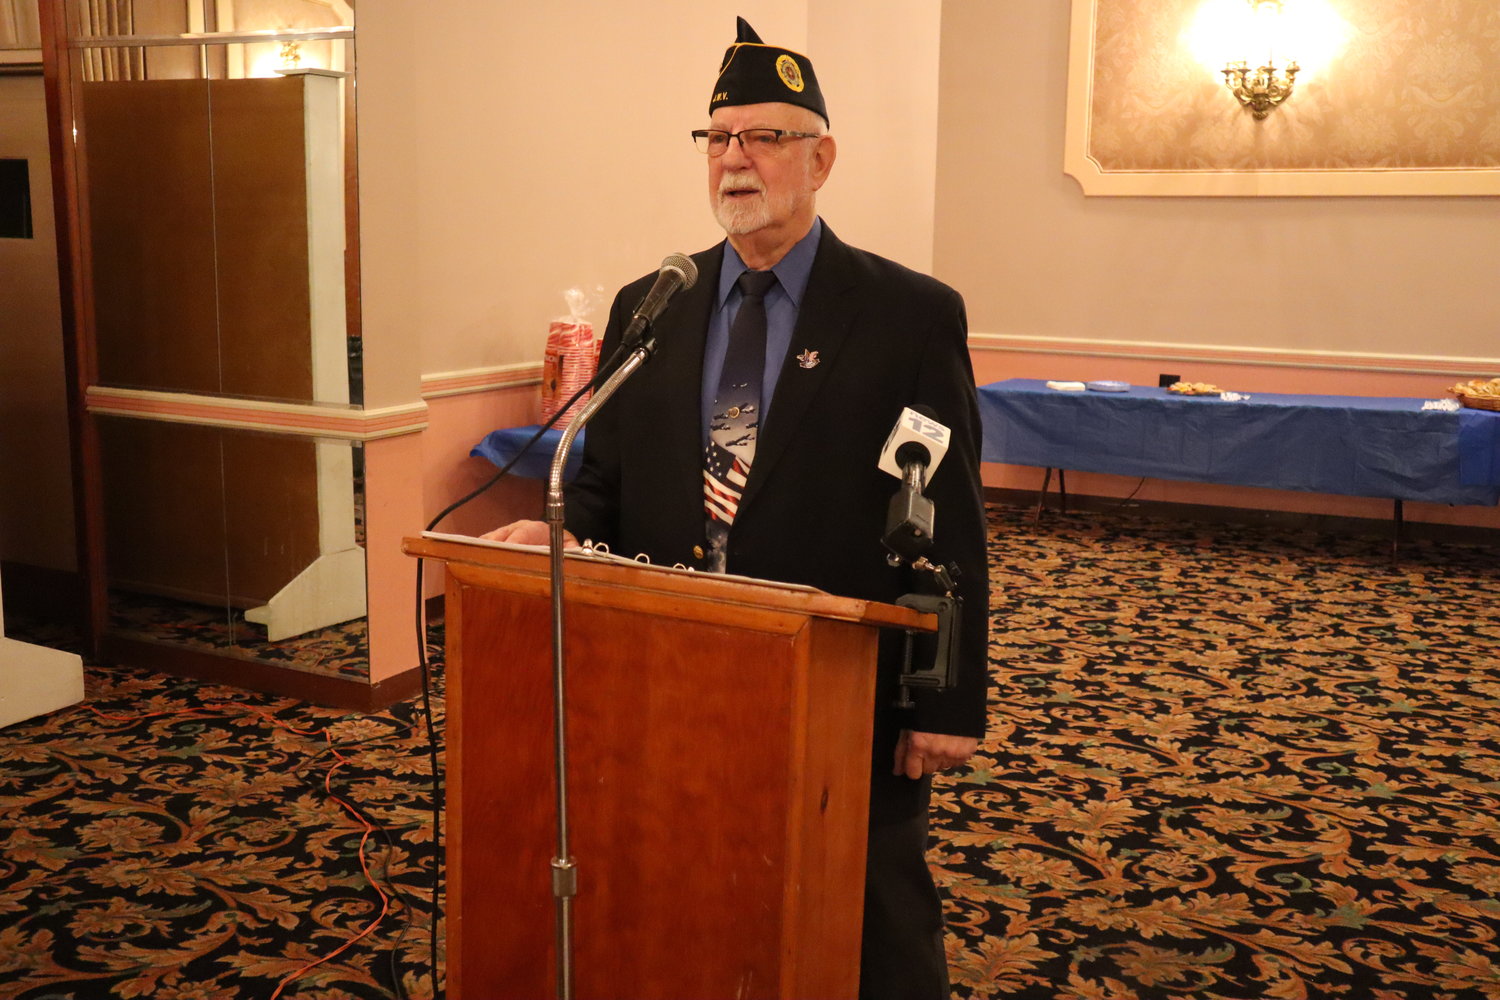 Eric Spinner, commander of Jewish War Veterans Post 652, discusses the importance of 127 years for the national organization as well as the recent anniversary of Iwo Jima, one of the turning points of World War II’s Pacific conflict.